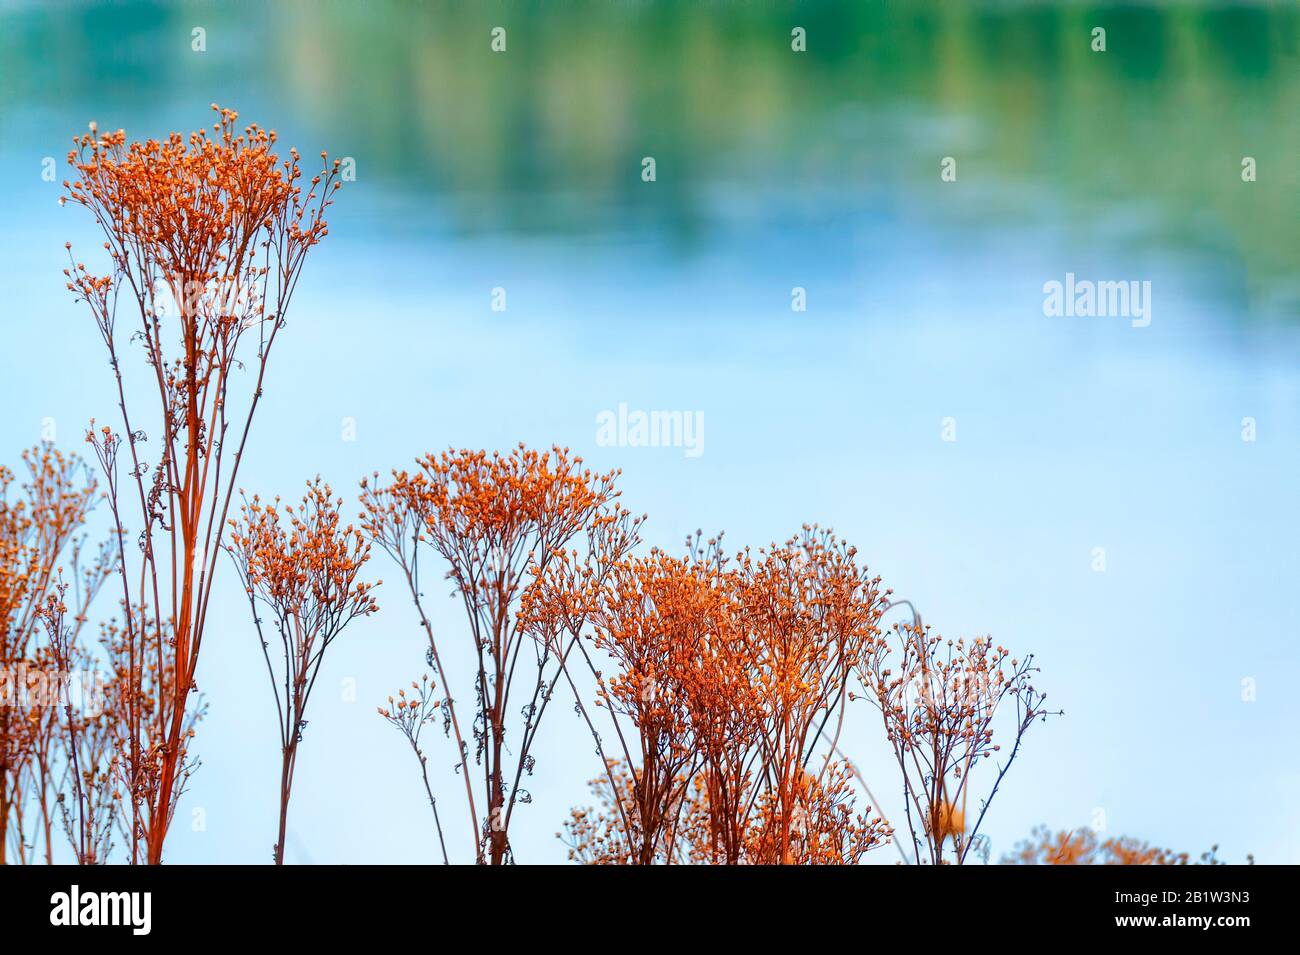 Autumn colors of now dead structured of plants along the banks of a lake Stock Photo